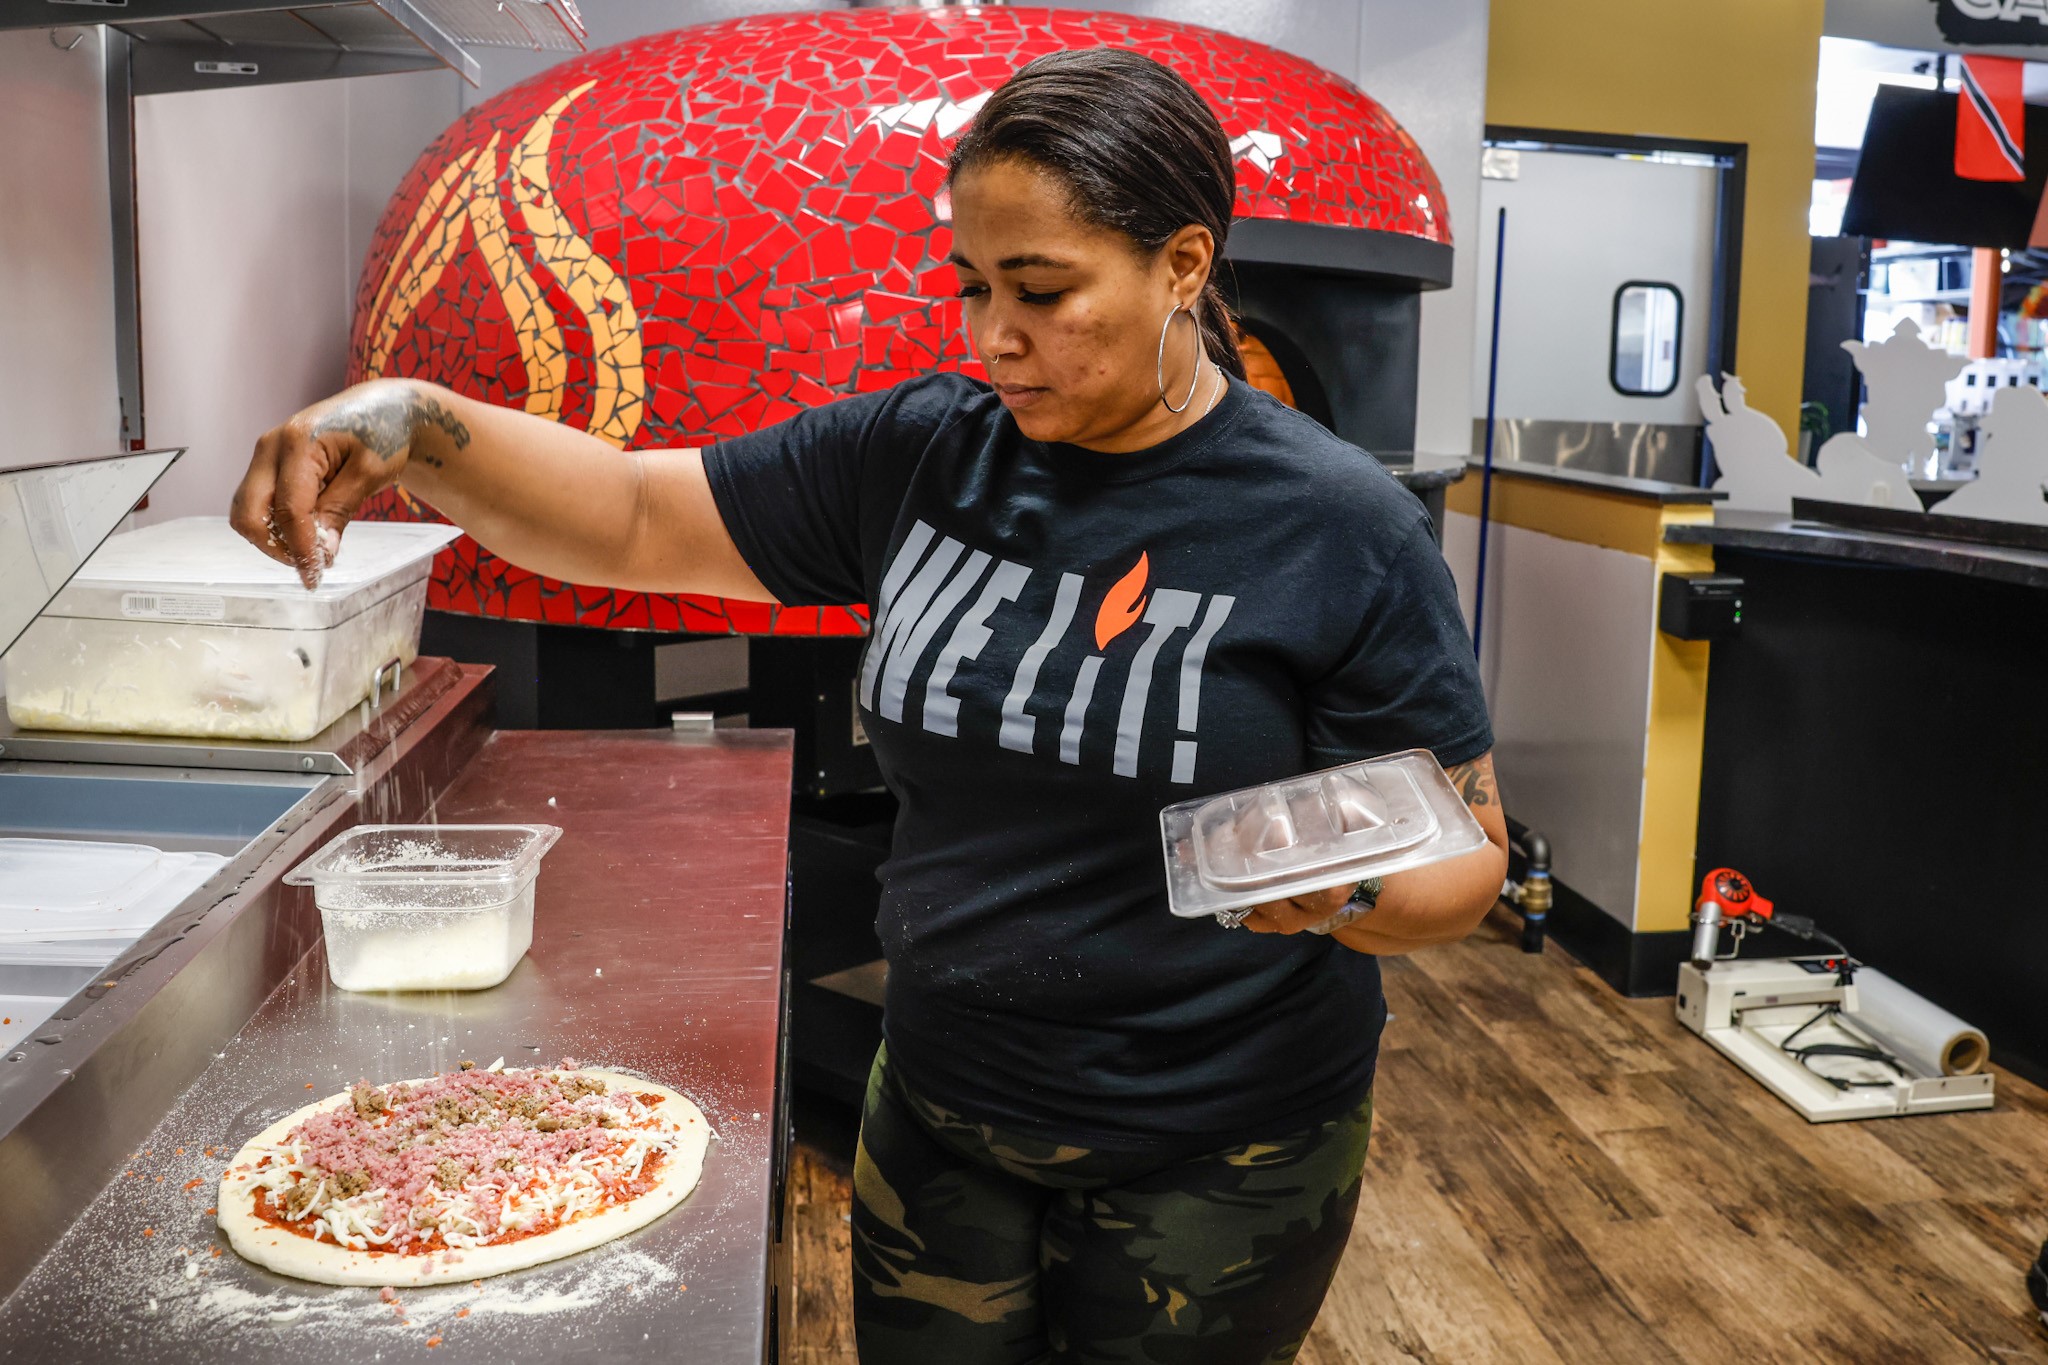 ILLY'S Fire Pizza owner, Kelly Gunn sprinkles toppings on a pizza before sliding it into the oven. ILLY'S Fire Pizza is located inside West Social Tap and Table, located at 1100 West Third St. in Dayton. JIM NOELKER/STAFF